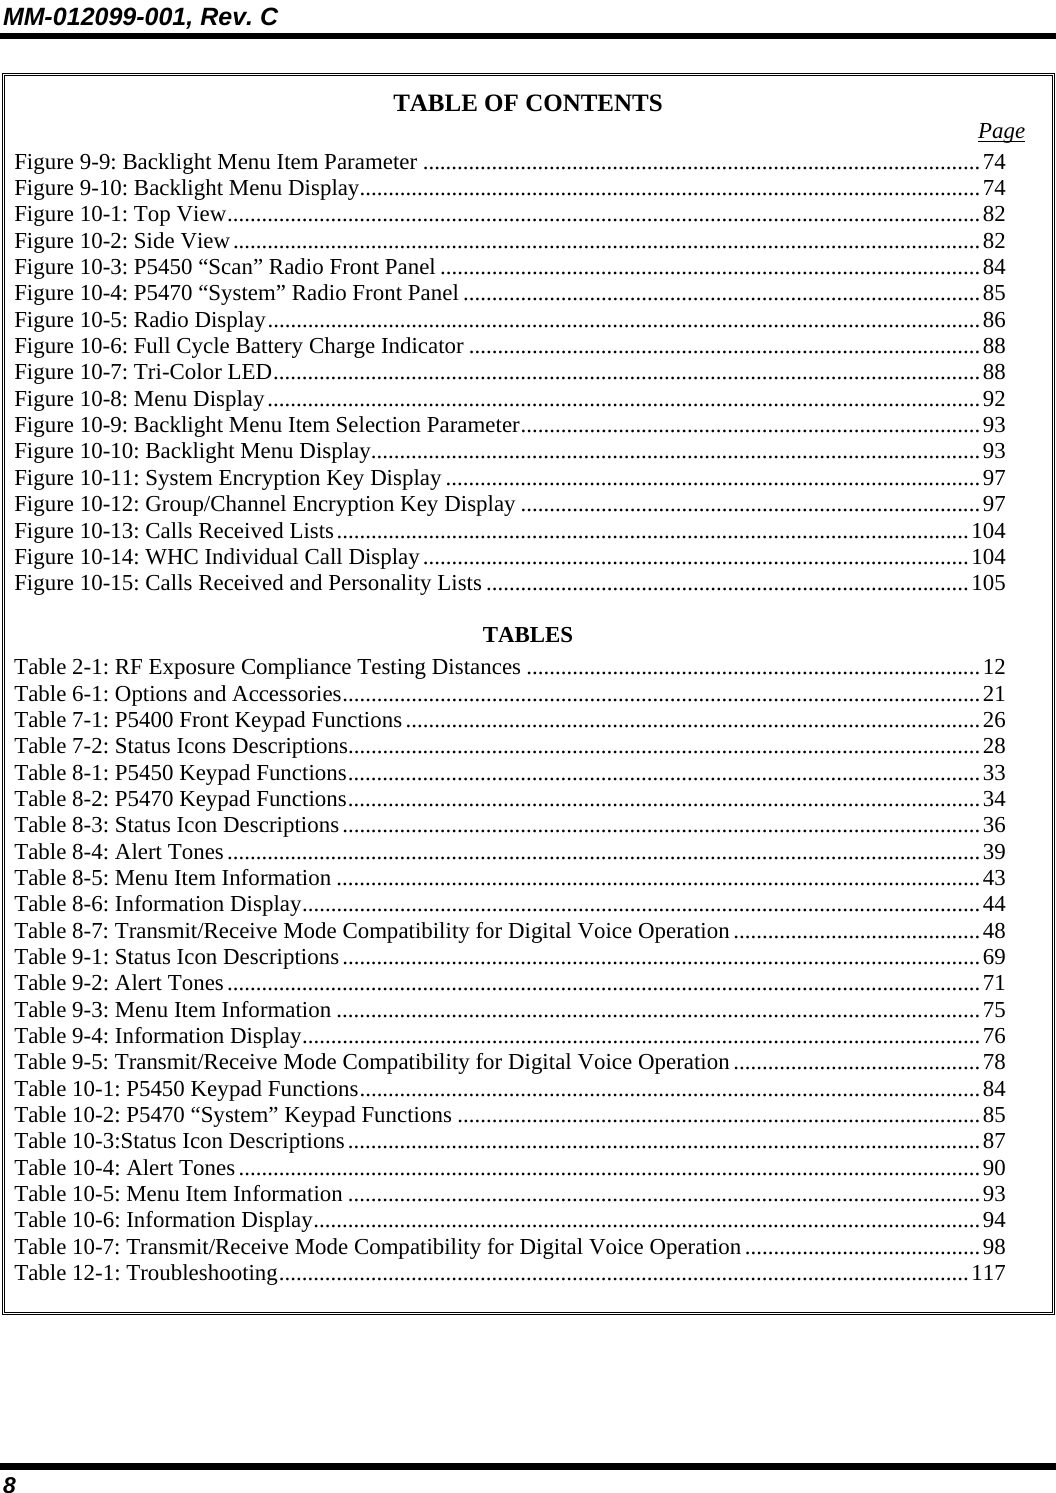 MM-012099-001, Rev. C 8 TABLE OF CONTENTS  Page Figure 9-9: Backlight Menu Item Parameter .................................................................................................74 Figure 9-10: Backlight Menu Display............................................................................................................74 Figure 10-1: Top View...................................................................................................................................82 Figure 10-2: Side View..................................................................................................................................82 Figure 10-3: P5450 “Scan” Radio Front Panel ..............................................................................................84 Figure 10-4: P5470 “System” Radio Front Panel ..........................................................................................85 Figure 10-5: Radio Display............................................................................................................................86 Figure 10-6: Full Cycle Battery Charge Indicator .........................................................................................88 Figure 10-7: Tri-Color LED...........................................................................................................................88 Figure 10-8: Menu Display............................................................................................................................92 Figure 10-9: Backlight Menu Item Selection Parameter................................................................................93 Figure 10-10: Backlight Menu Display..........................................................................................................93 Figure 10-11: System Encryption Key Display .............................................................................................97 Figure 10-12: Group/Channel Encryption Key Display ................................................................................97 Figure 10-13: Calls Received Lists..............................................................................................................104 Figure 10-14: WHC Individual Call Display...............................................................................................104 Figure 10-15: Calls Received and Personality Lists ....................................................................................105 TABLES Table 2-1: RF Exposure Compliance Testing Distances ...............................................................................12 Table 6-1: Options and Accessories...............................................................................................................21 Table 7-1: P5400 Front Keypad Functions....................................................................................................26 Table 7-2: Status Icons Descriptions..............................................................................................................28 Table 8-1: P5450 Keypad Functions..............................................................................................................33 Table 8-2: P5470 Keypad Functions..............................................................................................................34 Table 8-3: Status Icon Descriptions...............................................................................................................36 Table 8-4: Alert Tones...................................................................................................................................39 Table 8-5: Menu Item Information ................................................................................................................43 Table 8-6: Information Display......................................................................................................................44 Table 8-7: Transmit/Receive Mode Compatibility for Digital Voice Operation...........................................48 Table 9-1: Status Icon Descriptions...............................................................................................................69 Table 9-2: Alert Tones...................................................................................................................................71 Table 9-3: Menu Item Information ................................................................................................................75 Table 9-4: Information Display......................................................................................................................76 Table 9-5: Transmit/Receive Mode Compatibility for Digital Voice Operation...........................................78 Table 10-1: P5450 Keypad Functions............................................................................................................84 Table 10-2: P5470 “System” Keypad Functions ...........................................................................................85 Table 10-3:Status Icon Descriptions..............................................................................................................87 Table 10-4: Alert Tones.................................................................................................................................90 Table 10-5: Menu Item Information ..............................................................................................................93 Table 10-6: Information Display....................................................................................................................94 Table 10-7: Transmit/Receive Mode Compatibility for Digital Voice Operation.........................................98 Table 12-1: Troubleshooting........................................................................................................................117   